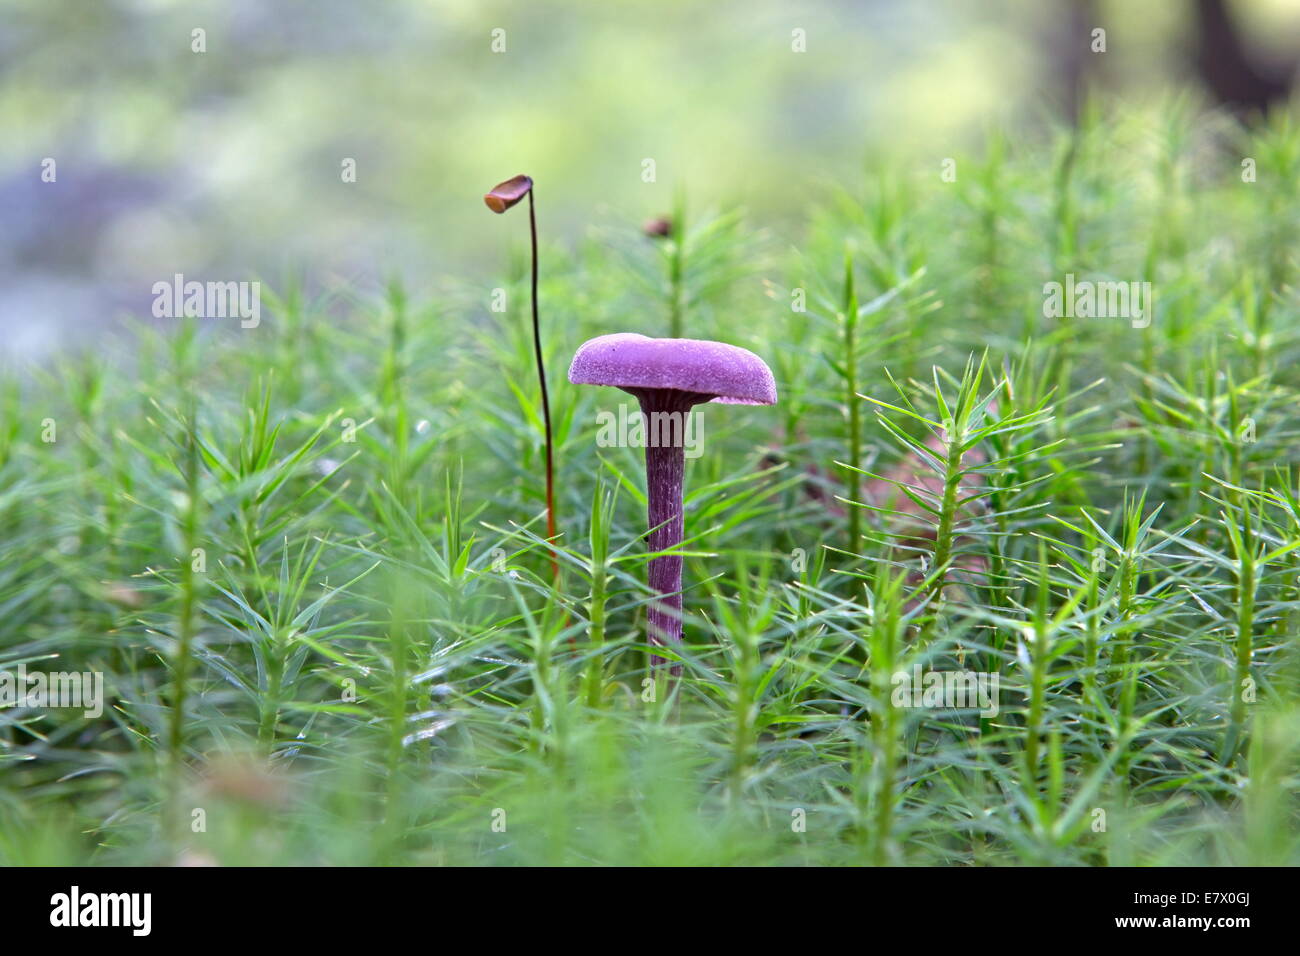 red cabbage mushroom grows between gaffeltandmos in the autumn forest, Netherlands Stock Photo